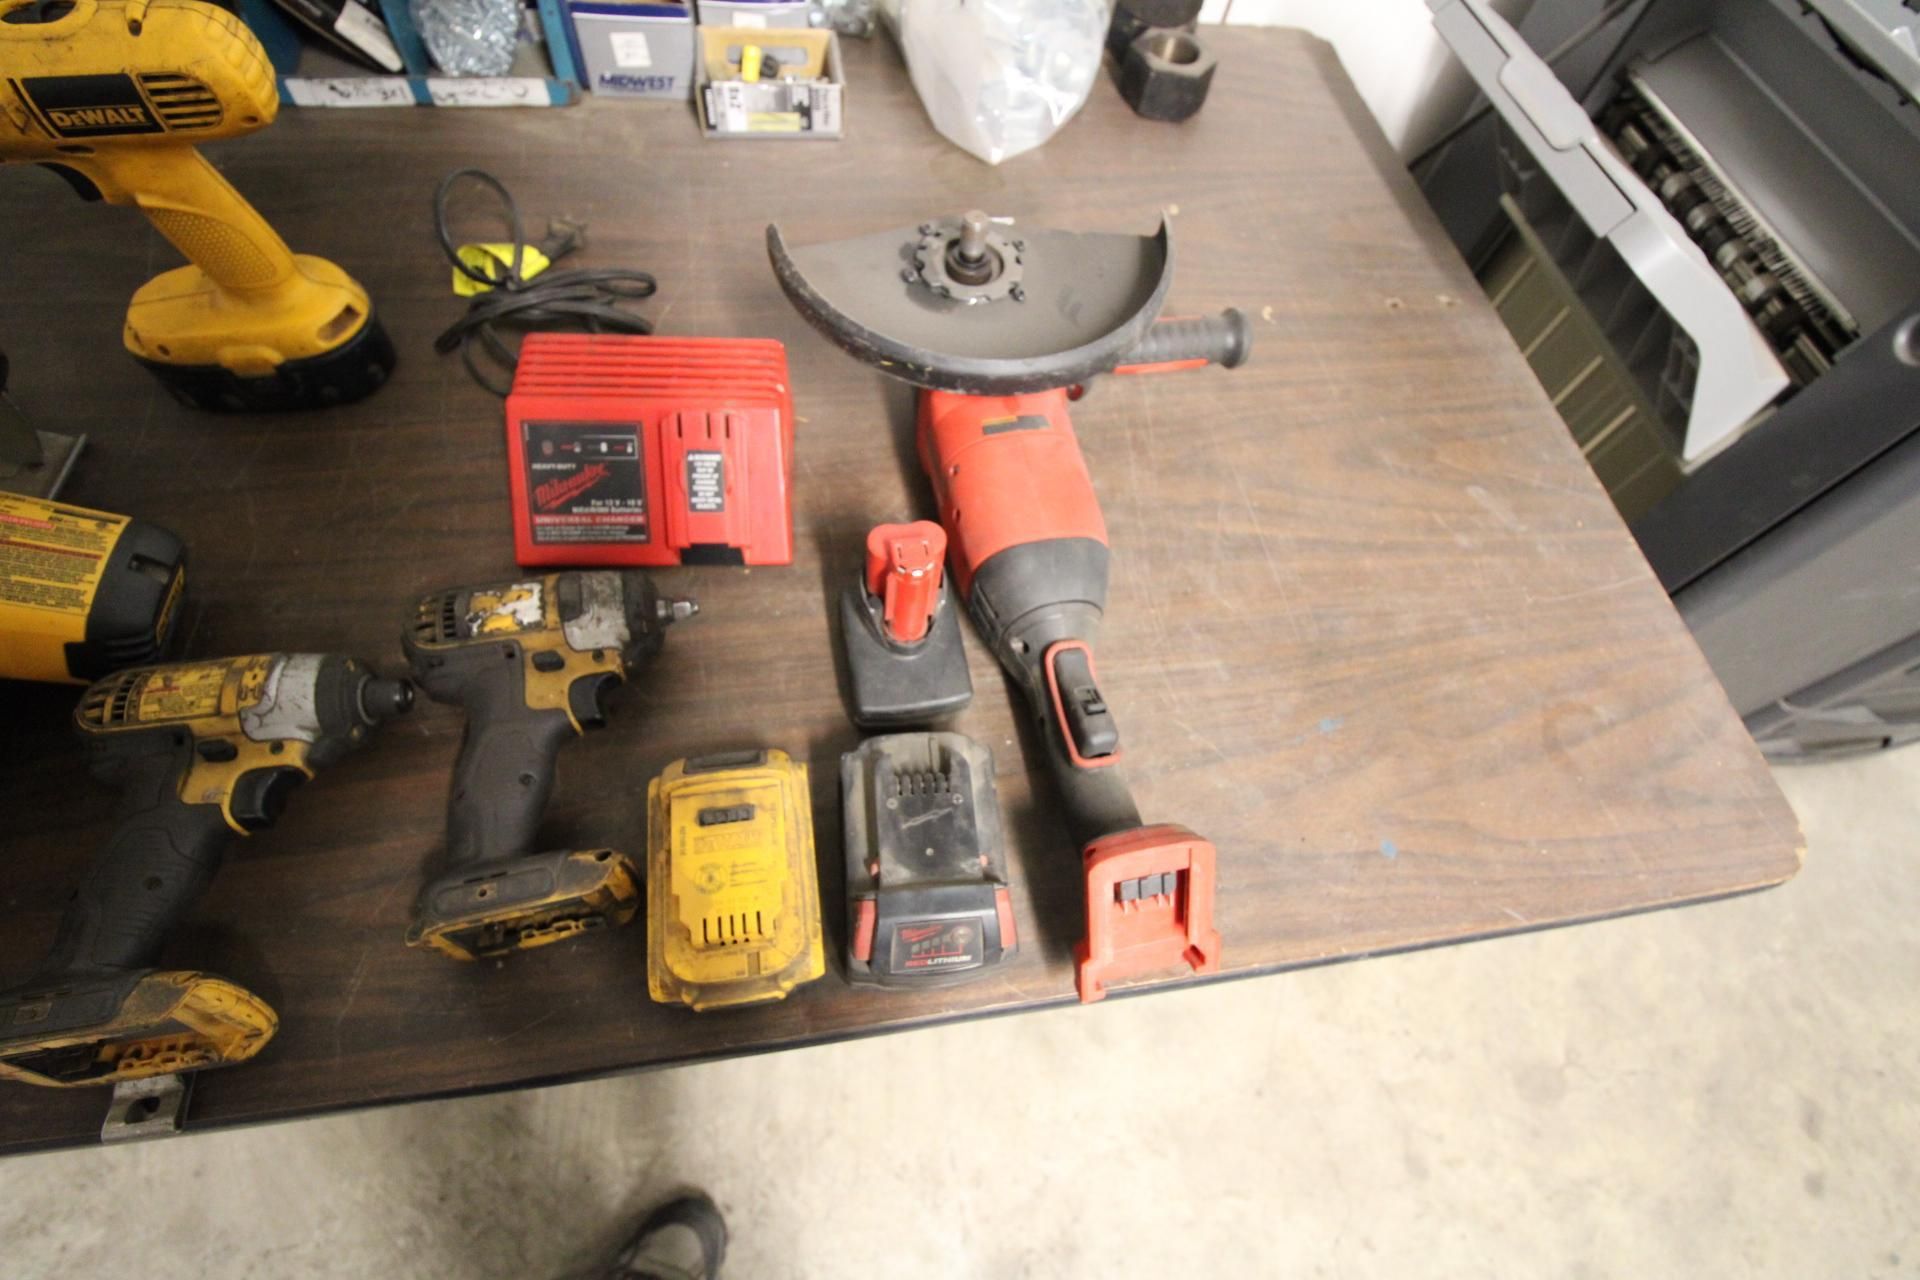 LOT OF BATTERY POWERED TOOLS: (1) Dewalt hand saw, drill, batteries, chargers & Milwaukee grinder, - Image 3 of 5